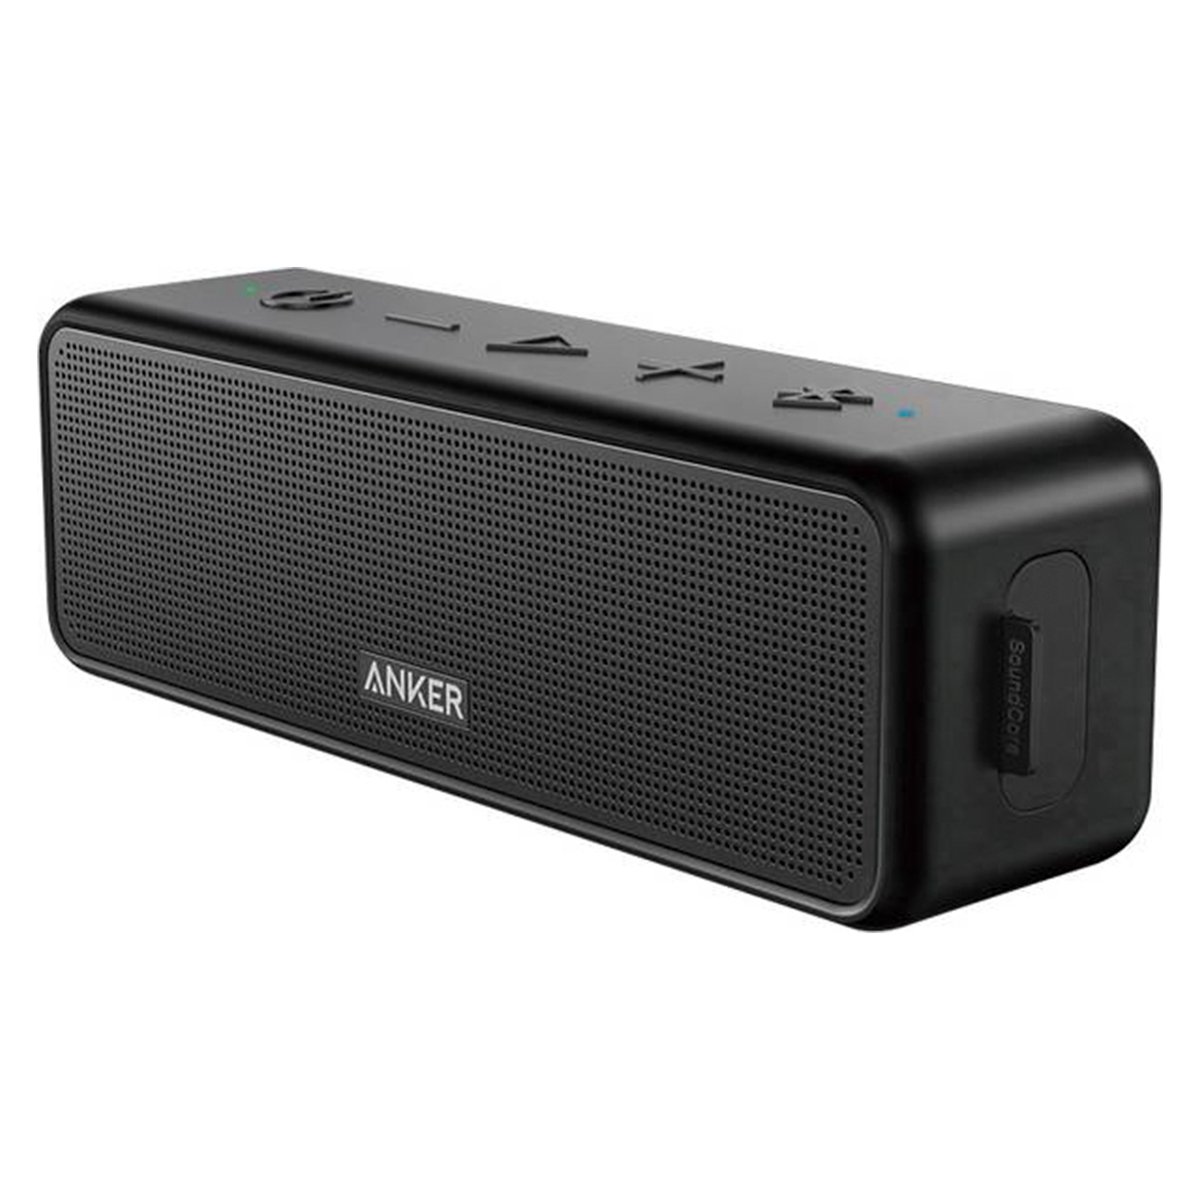 Anker SoundCore Select Bluetooth speaker(A3106H11) Aux, Handsfree, Outdoor, Dust-proof, Water-proof, NFC Black